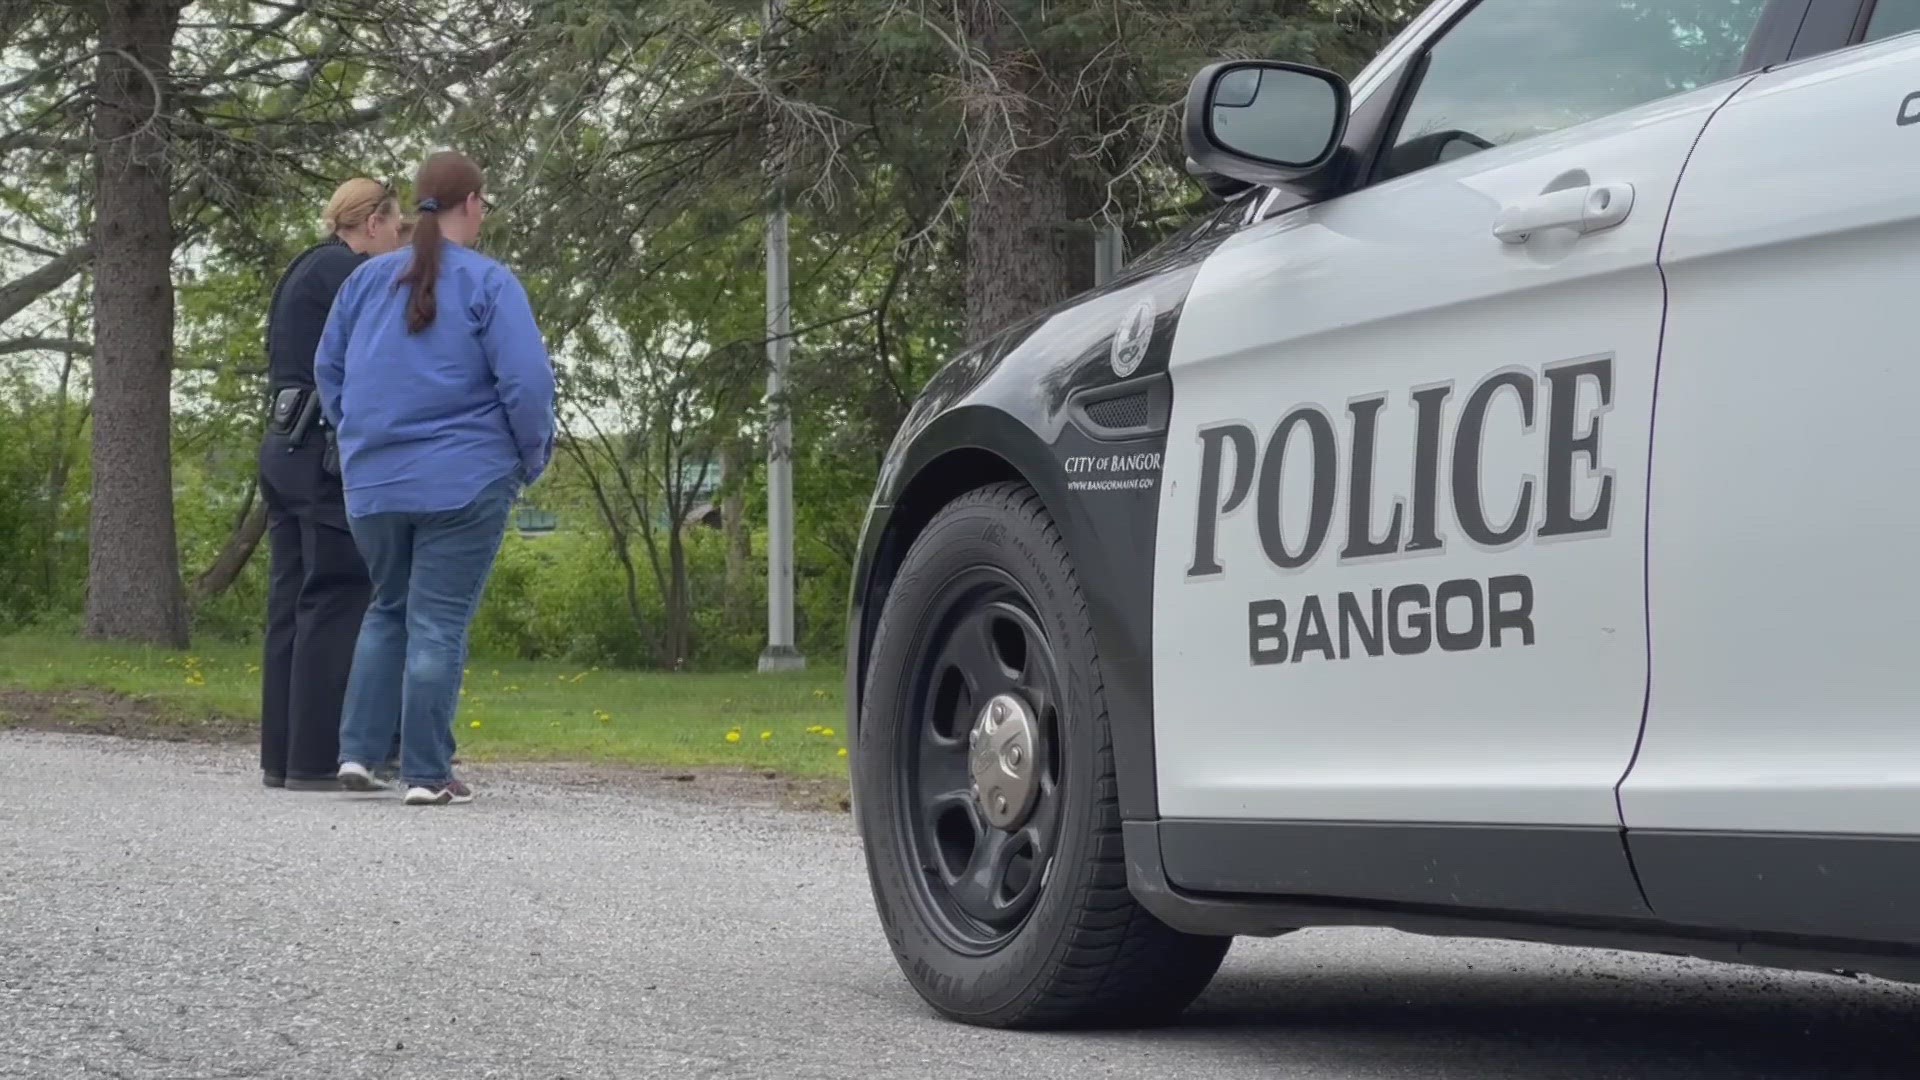 The Bangor Police Department partners with Northern Light Acadia Hospital to staff two liaisons to respond to calls police officers aren't specifically trained for.